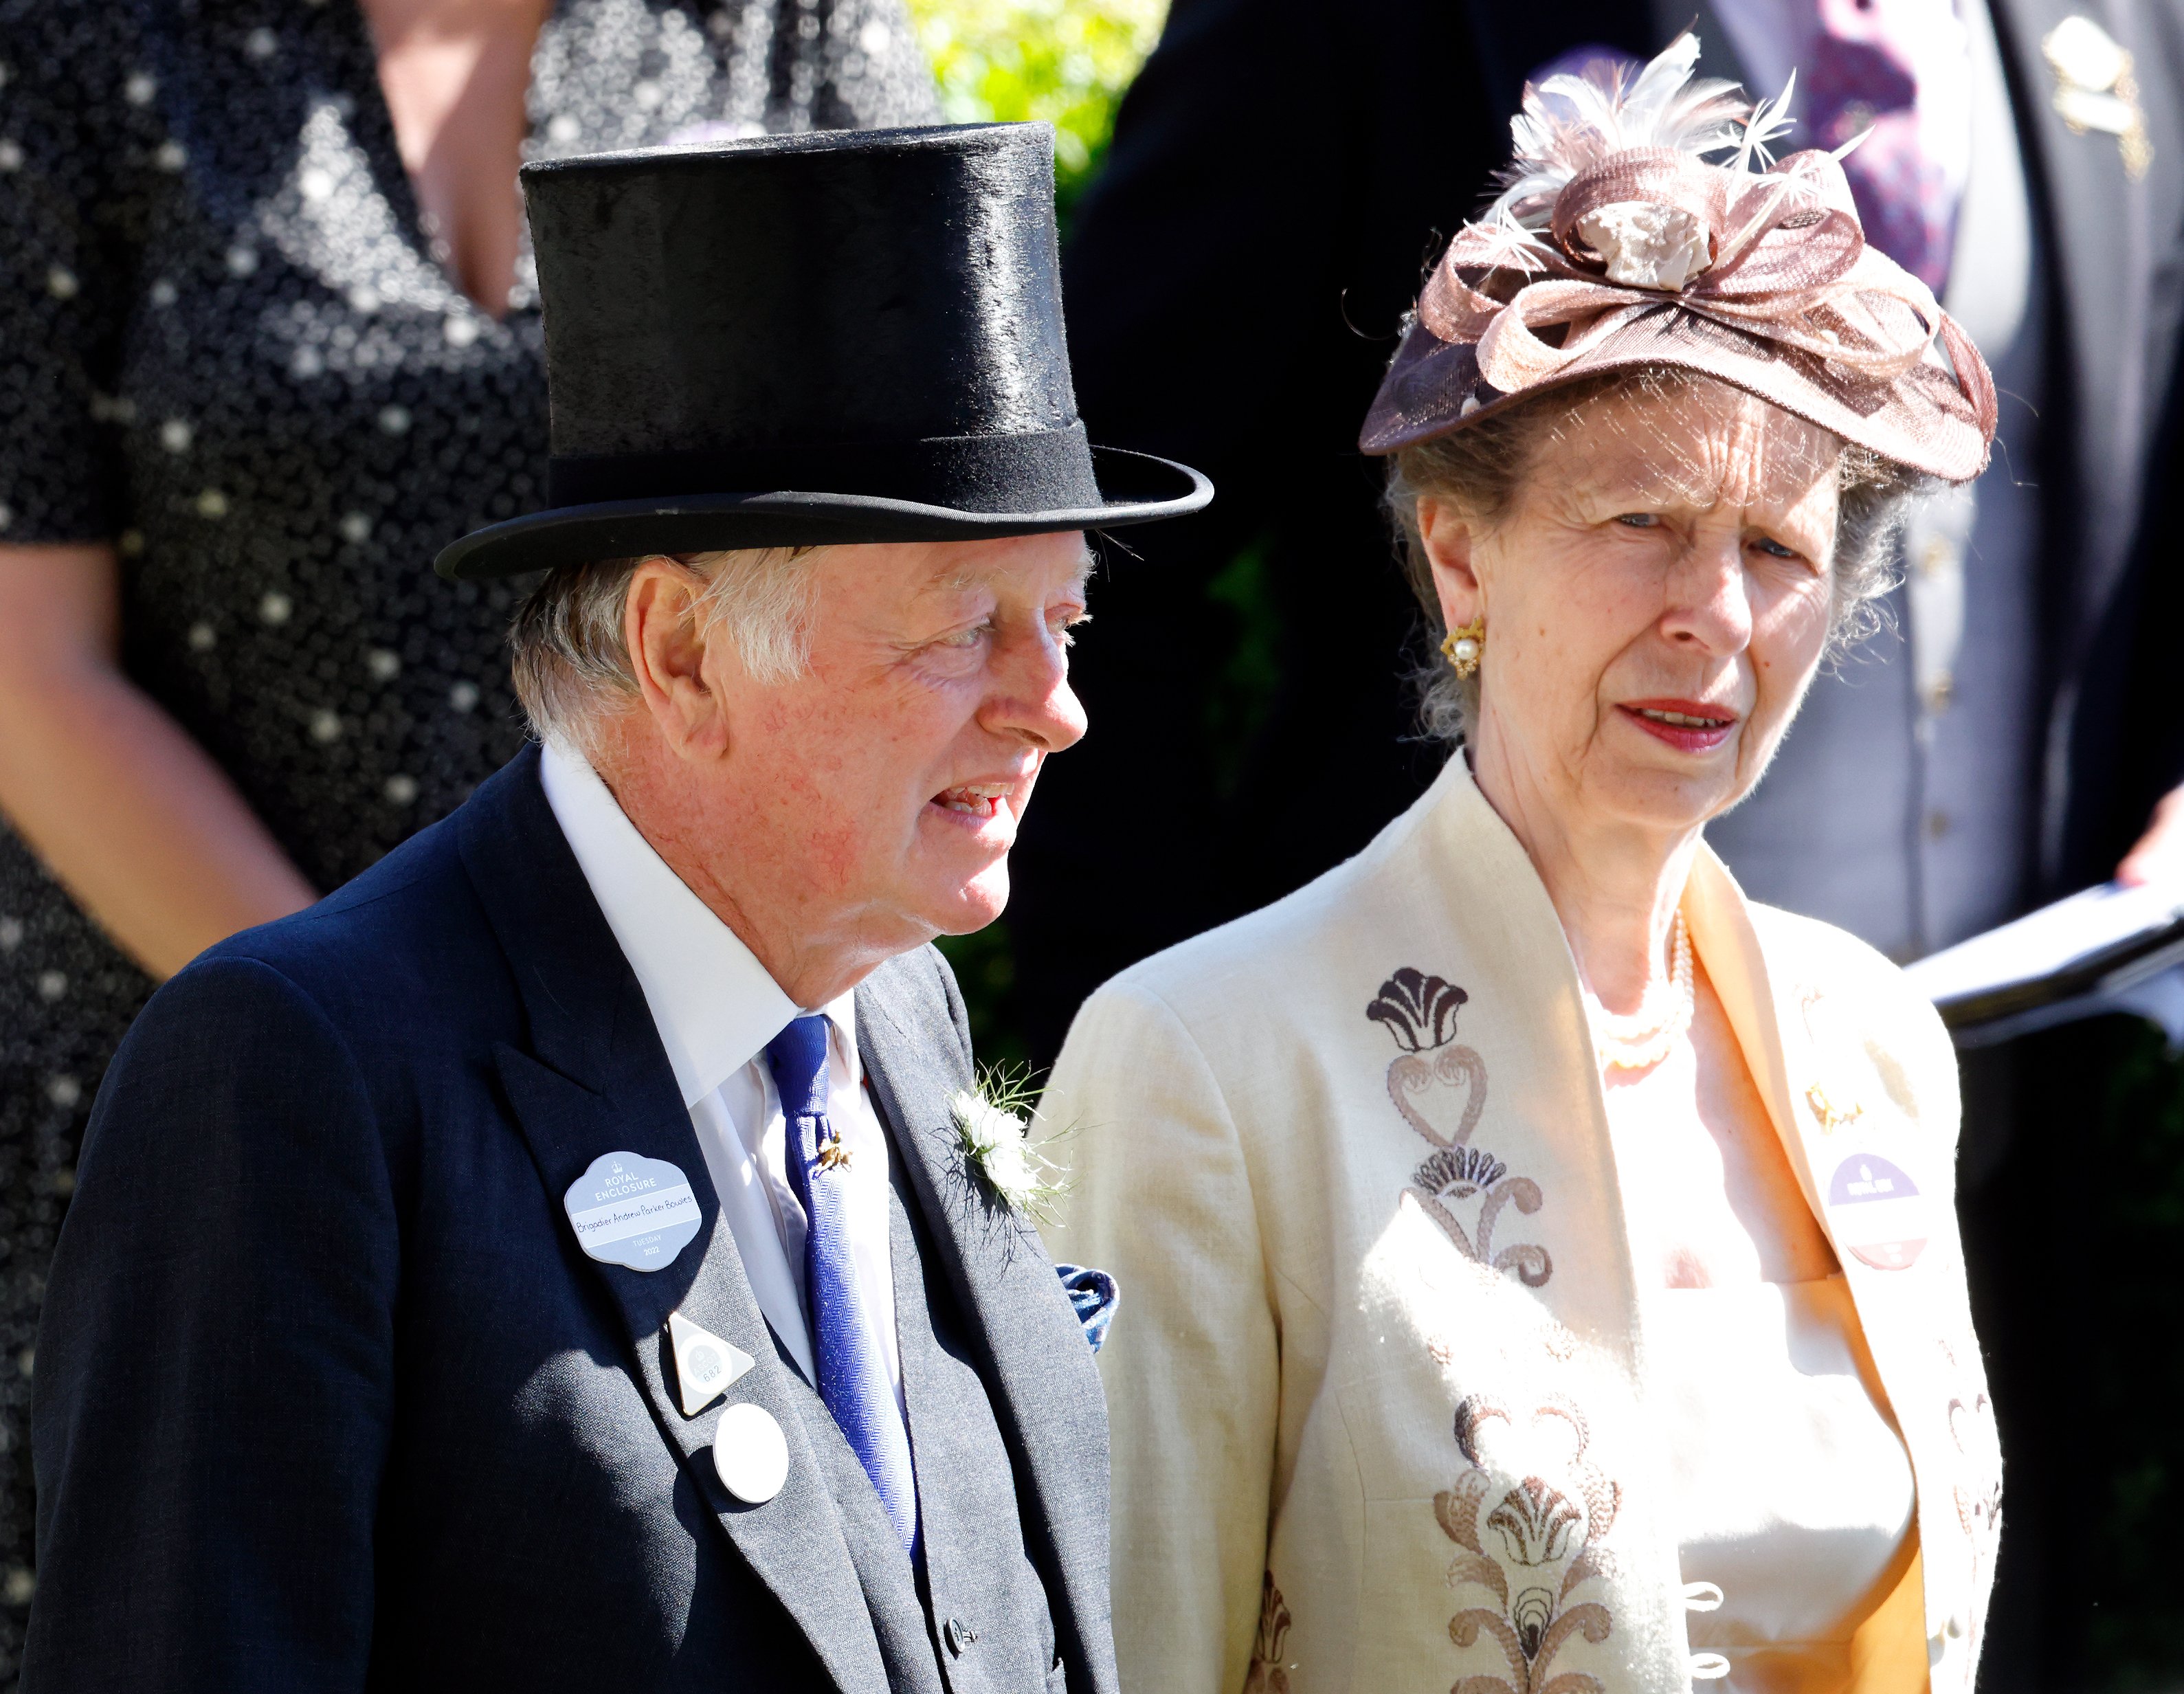 Andrew Parker Bowles and Princess Anne at Ascot Racecourse on June 14, 2022, in Ascot, England. | Source: Getty Images